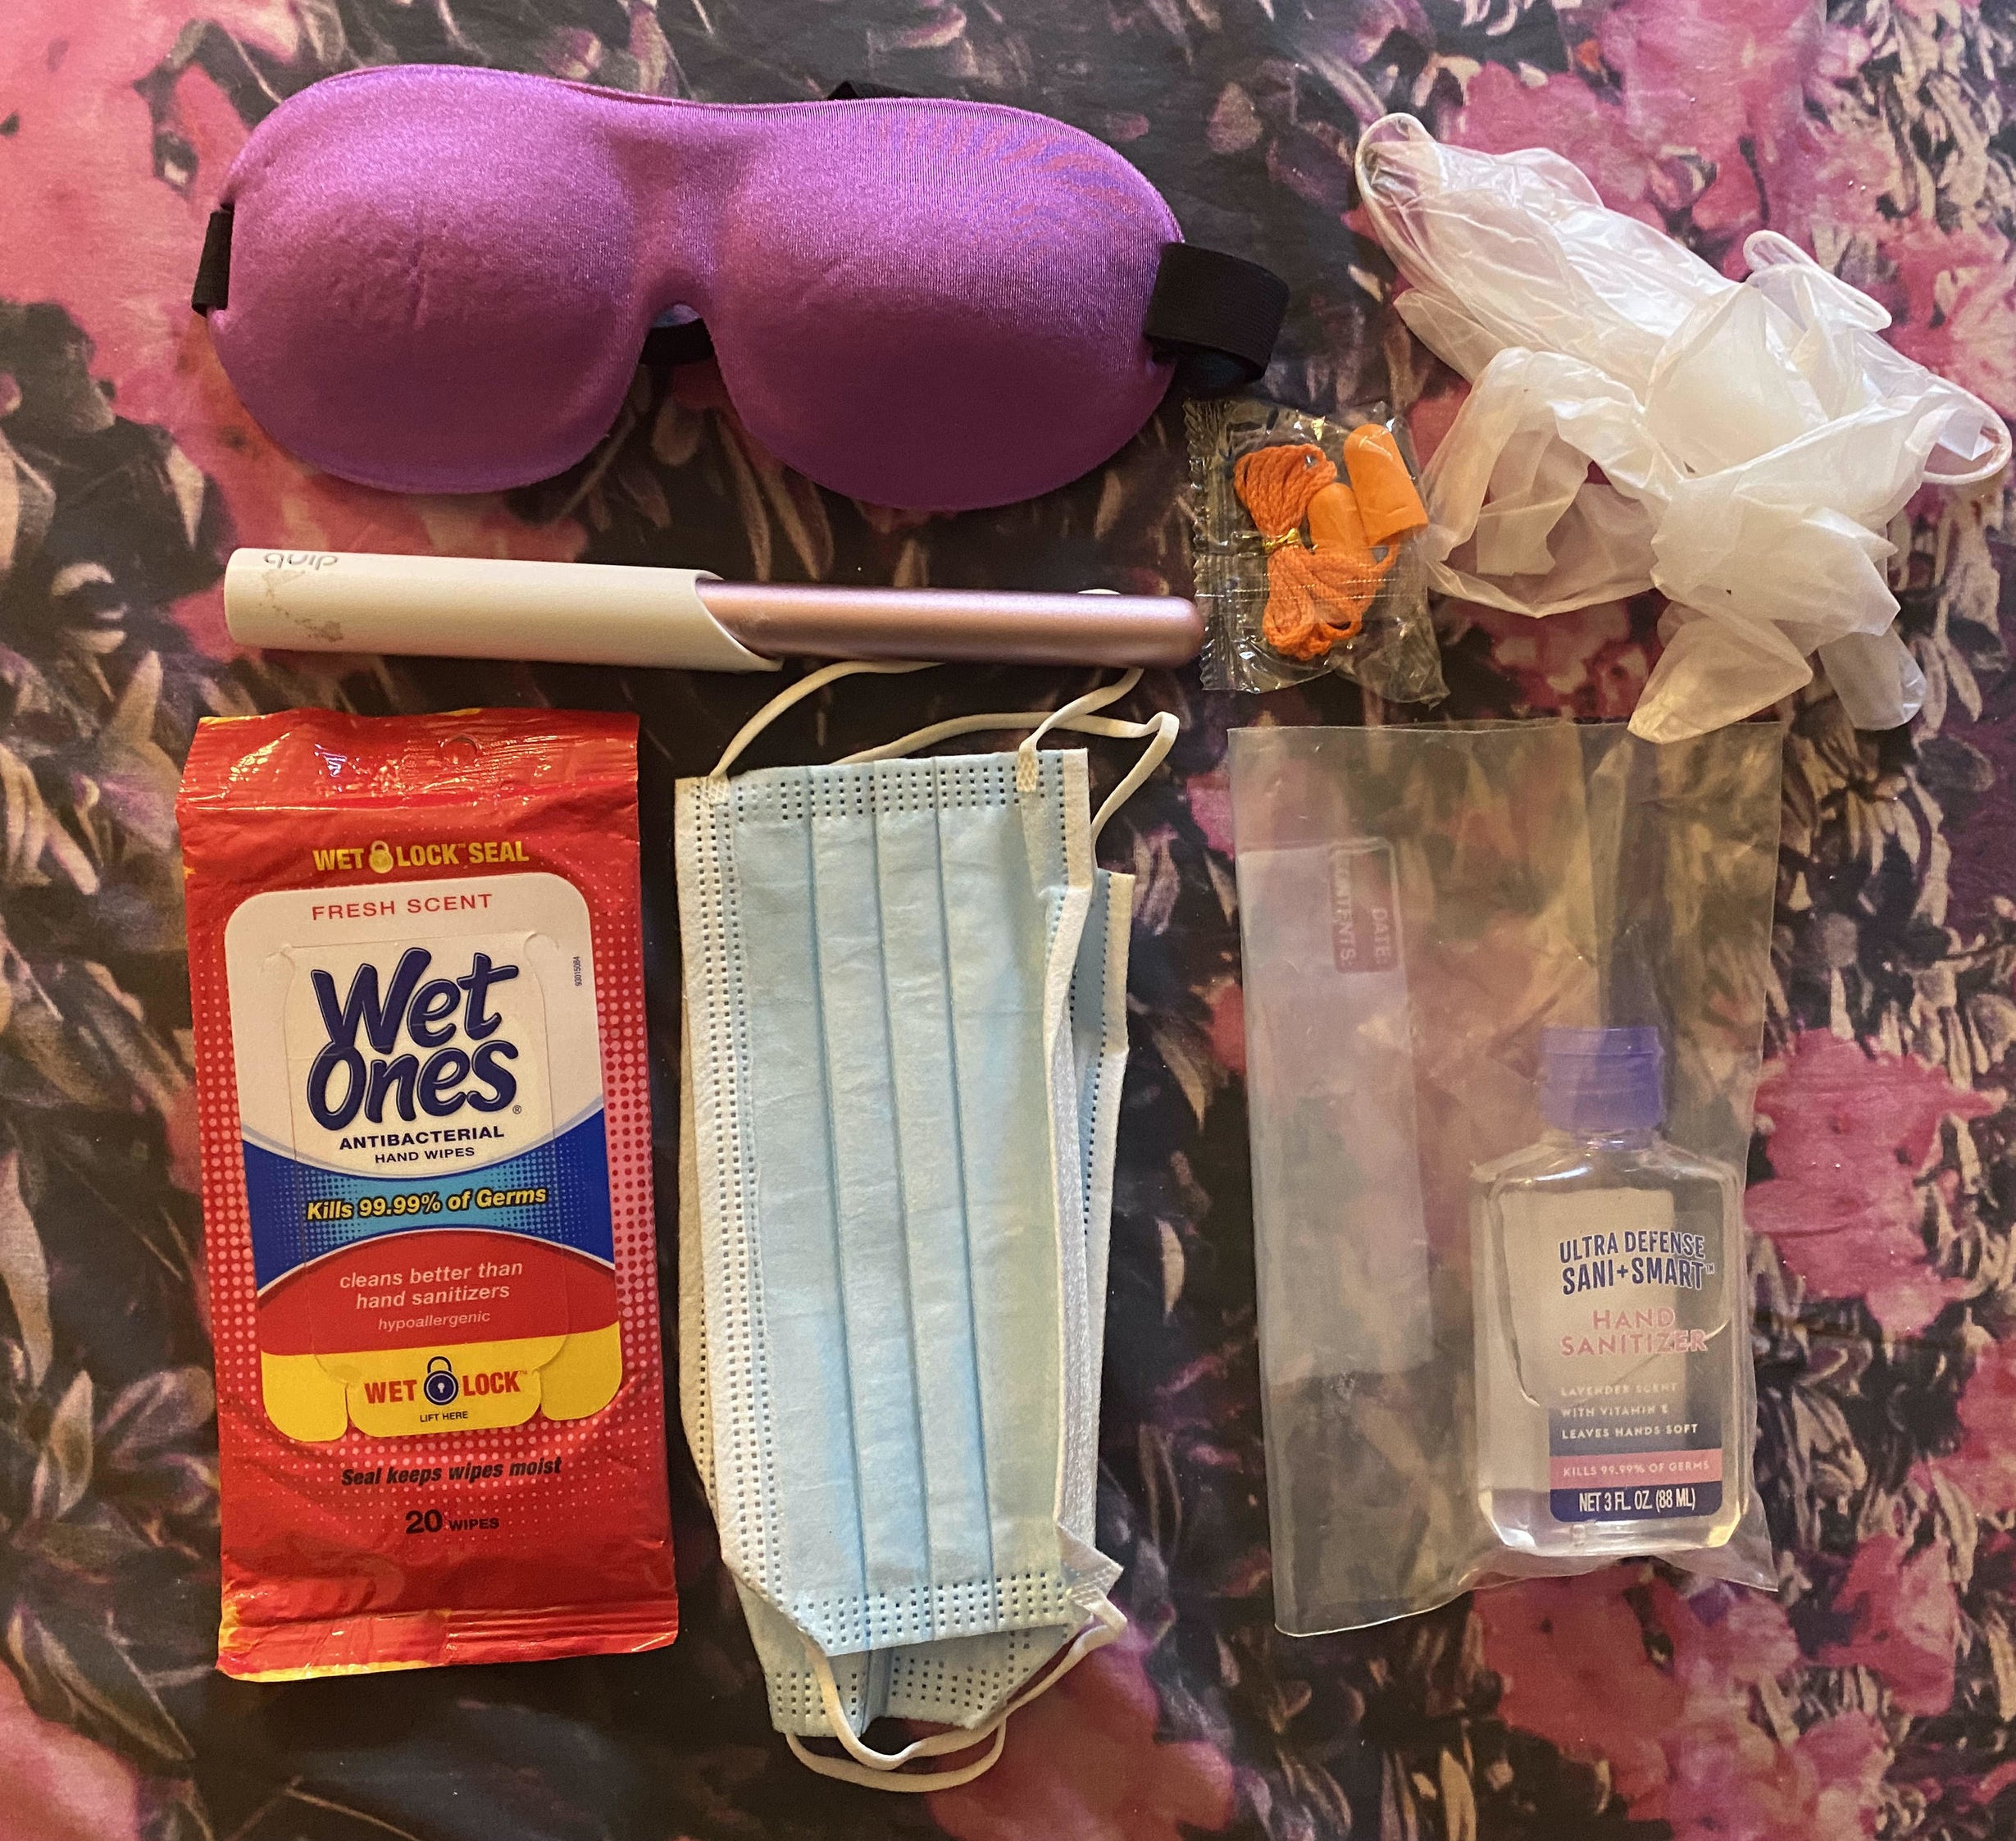 various plane carry on essentials like hand sanitizing wipes, masks, a bottle of hand sanitizer in a separate bag.